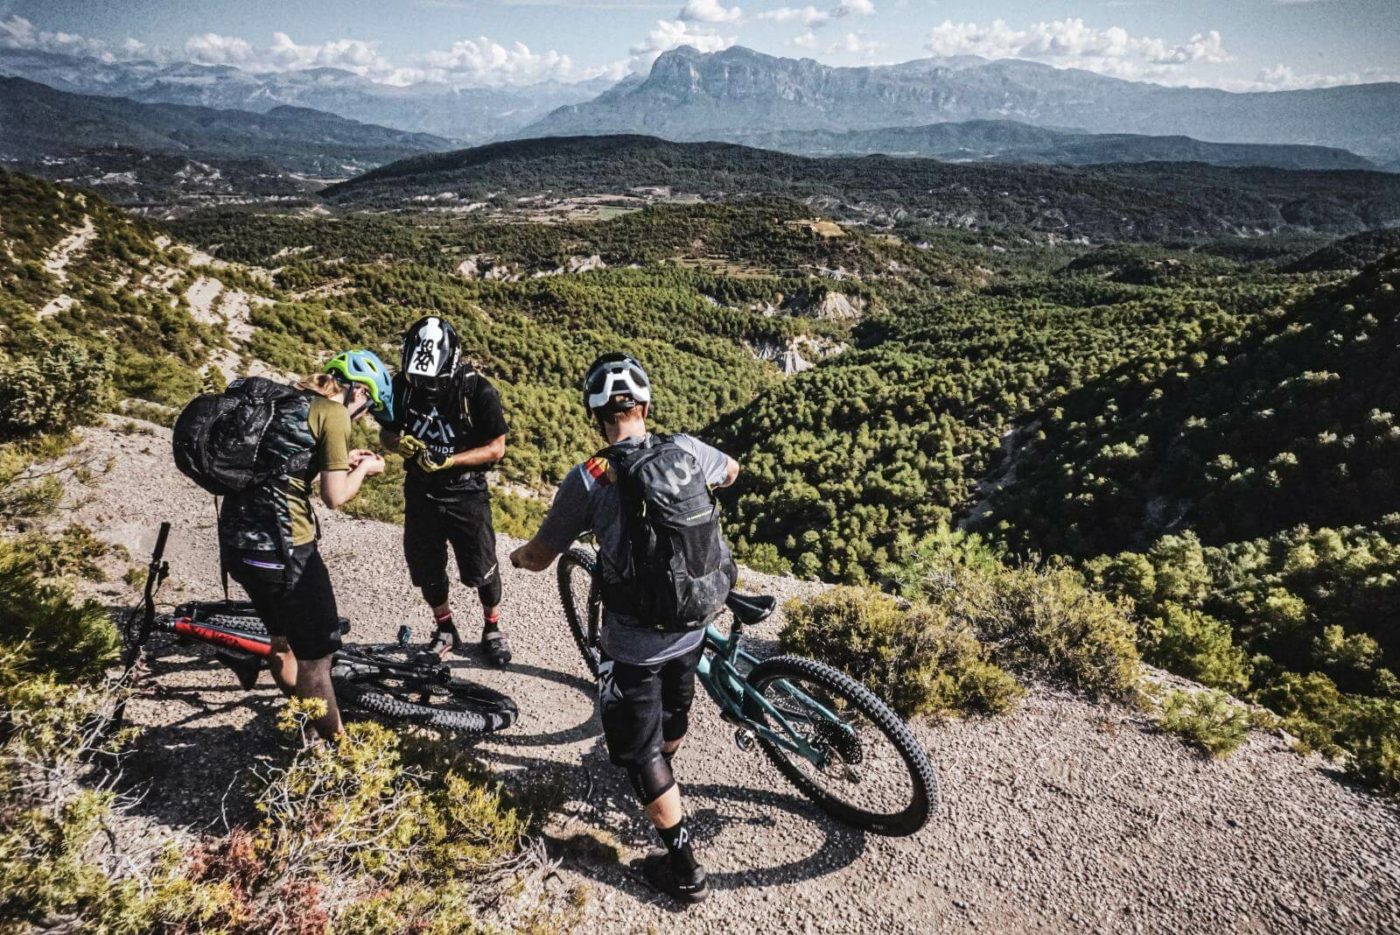 Three mountain bikers taking a break to look at fossils they found during a ride through the Pyrenees in Spain.